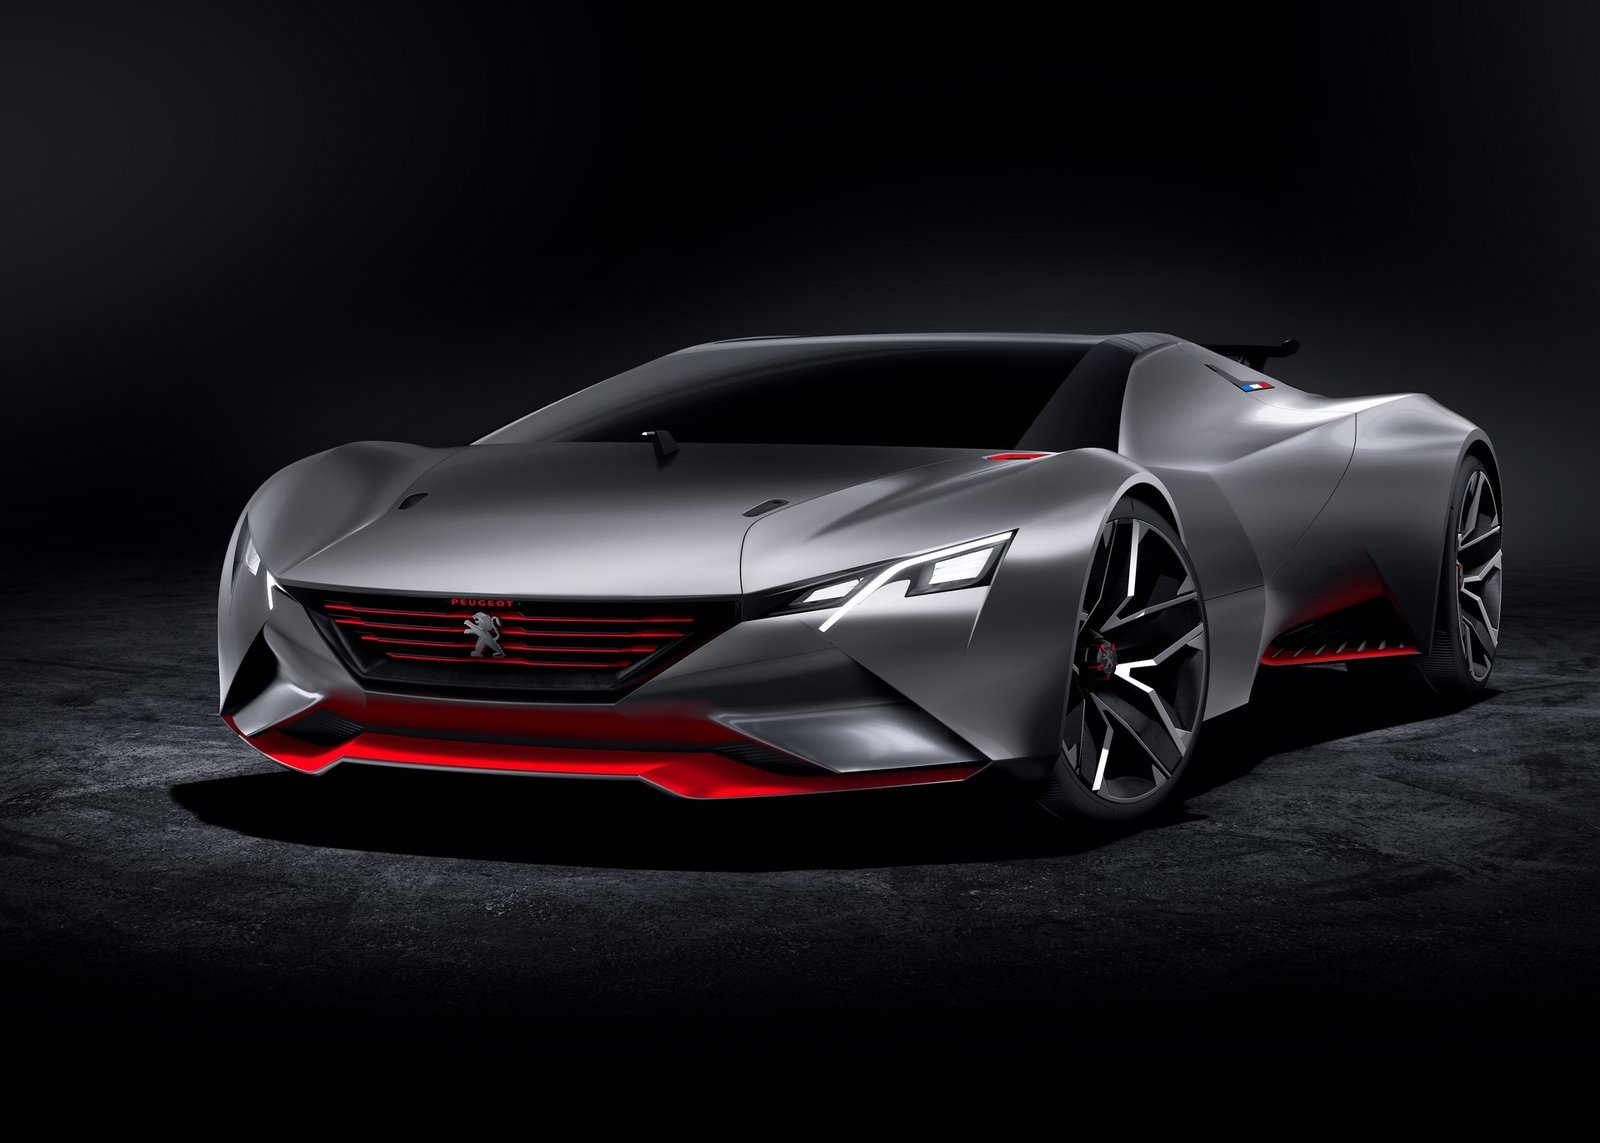  Peugeot Concept Hypercar ابرخودرو مفهومی پژو